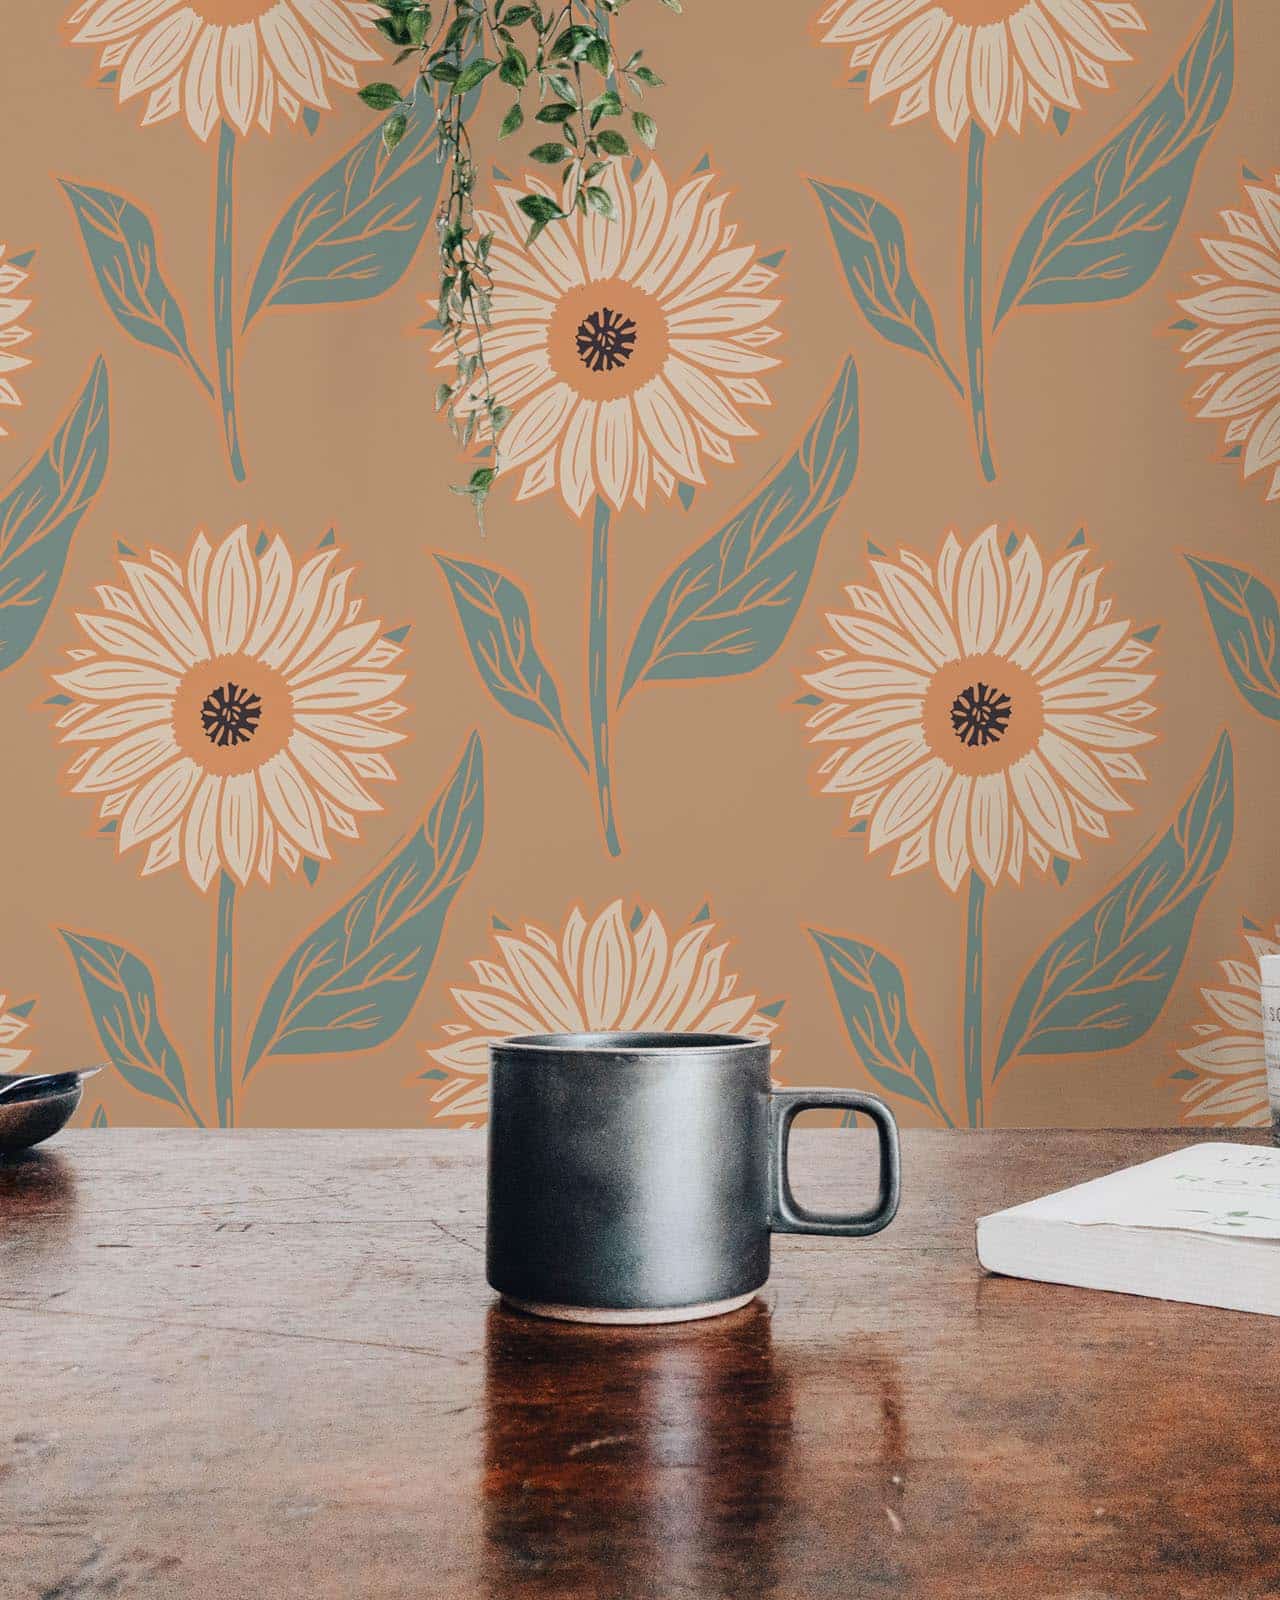 Warm sunflower floral pattern wallpaper - Peel and Stick Removable